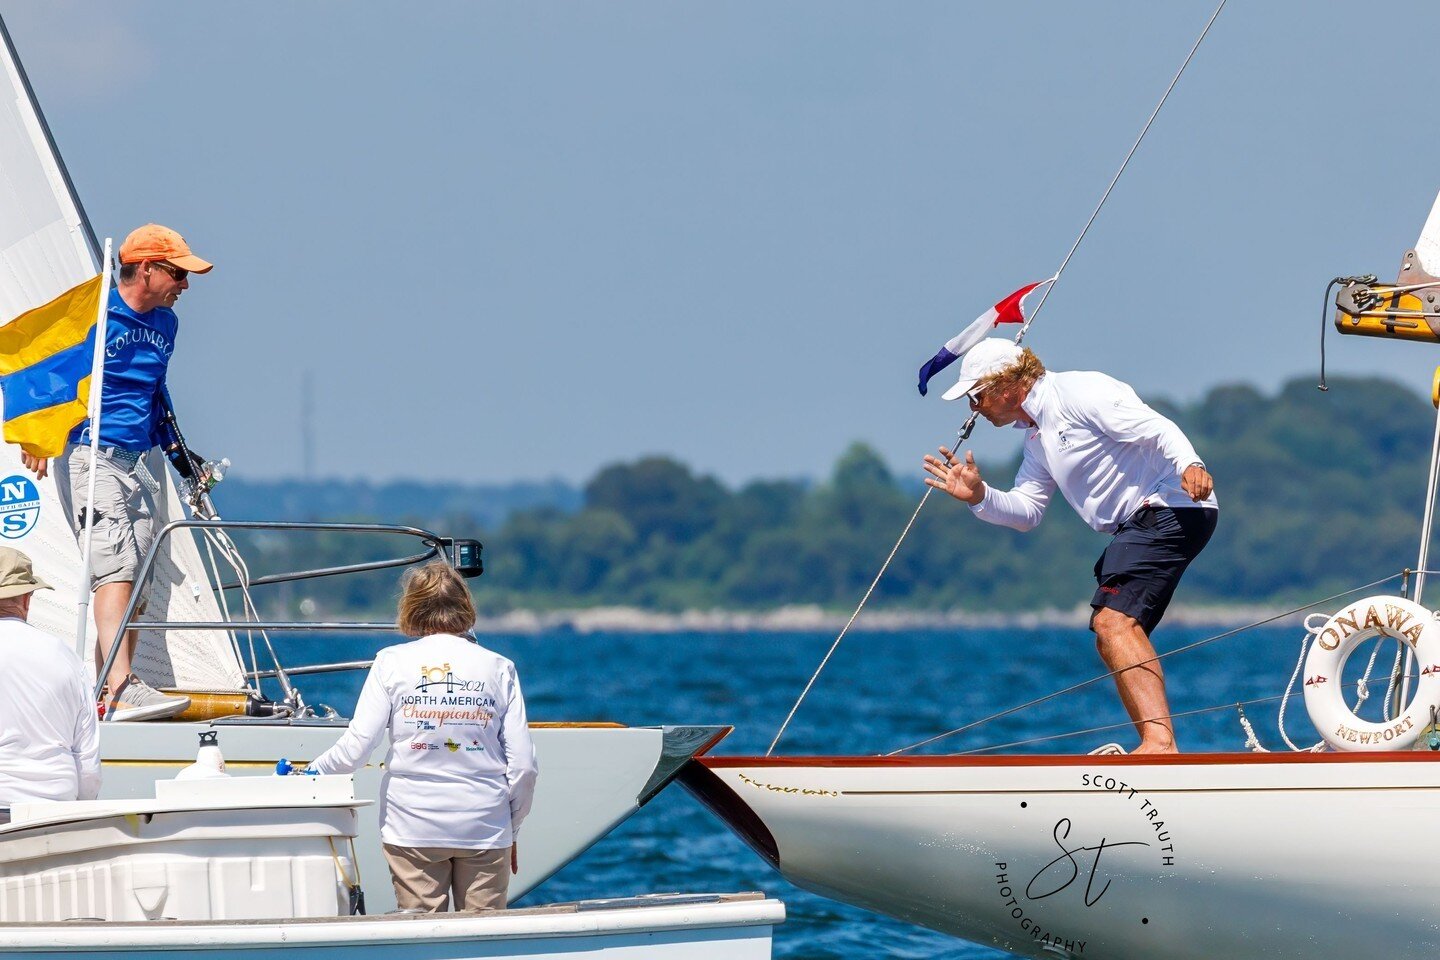 #frontendfriday meets #transomtuesday during the #newportregatta last week
Pictured is the bow of Columbia 12US16 making contact with the transom of Onawa 12US6 at the start of race 2 on Saturday.
@sailnewportri  @12metreclass @12_metre_yacht_club #1